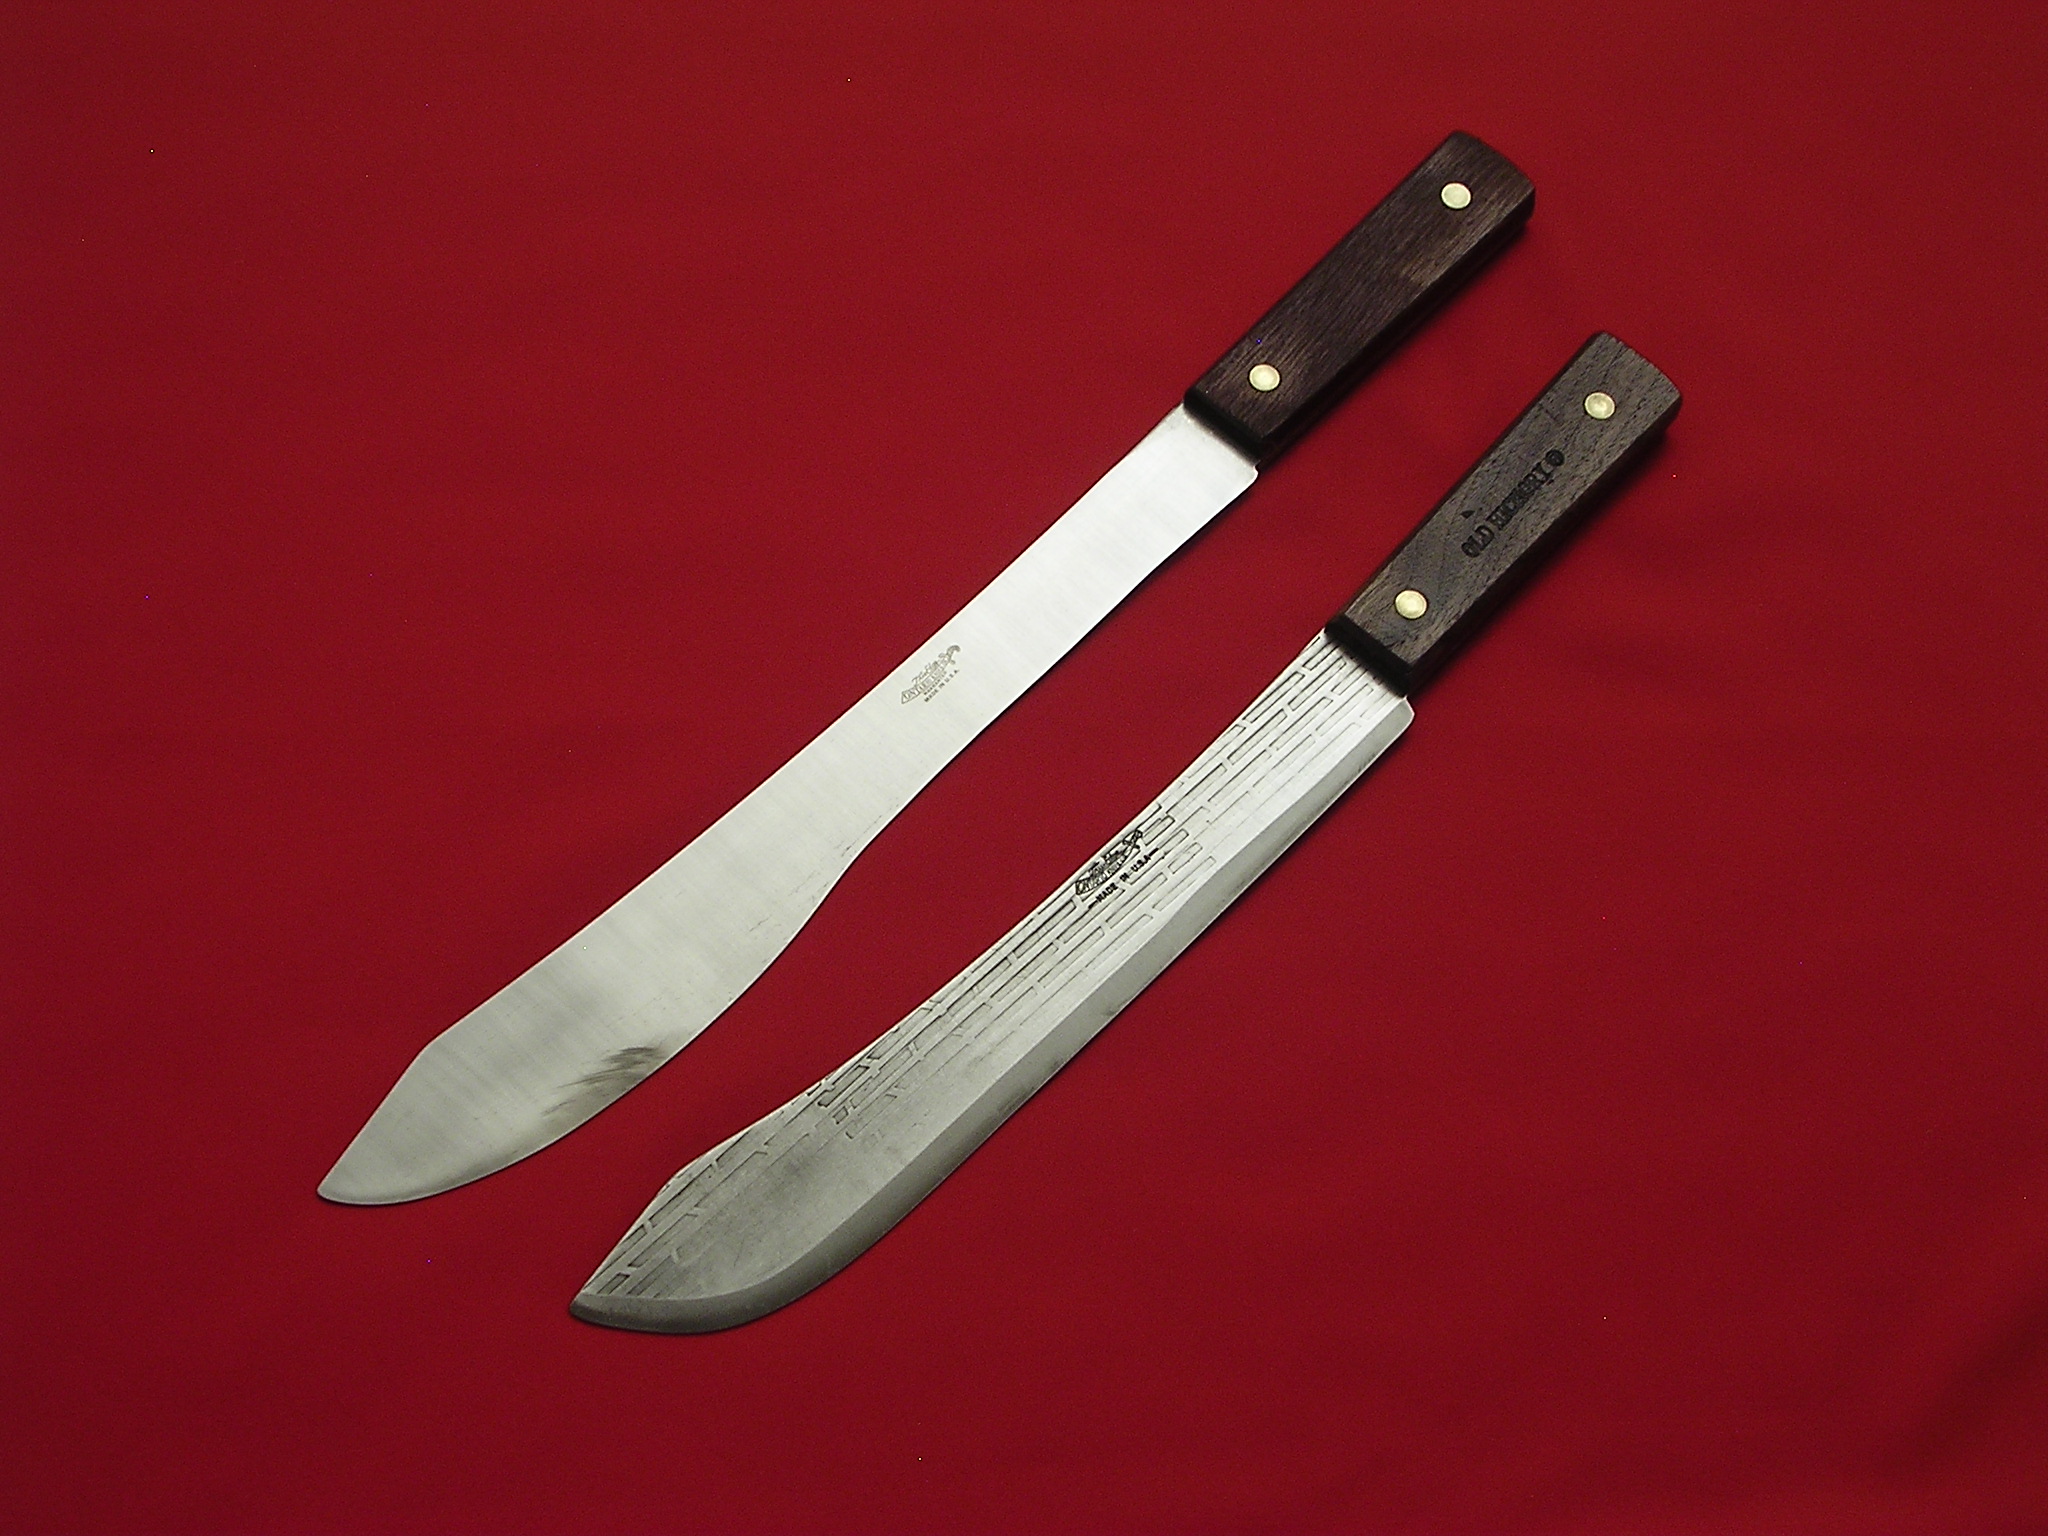 https://preferredarms.com/wp-content/uploads/2018/08/2-Butcher-Knives-12-and-14-inches.jpg